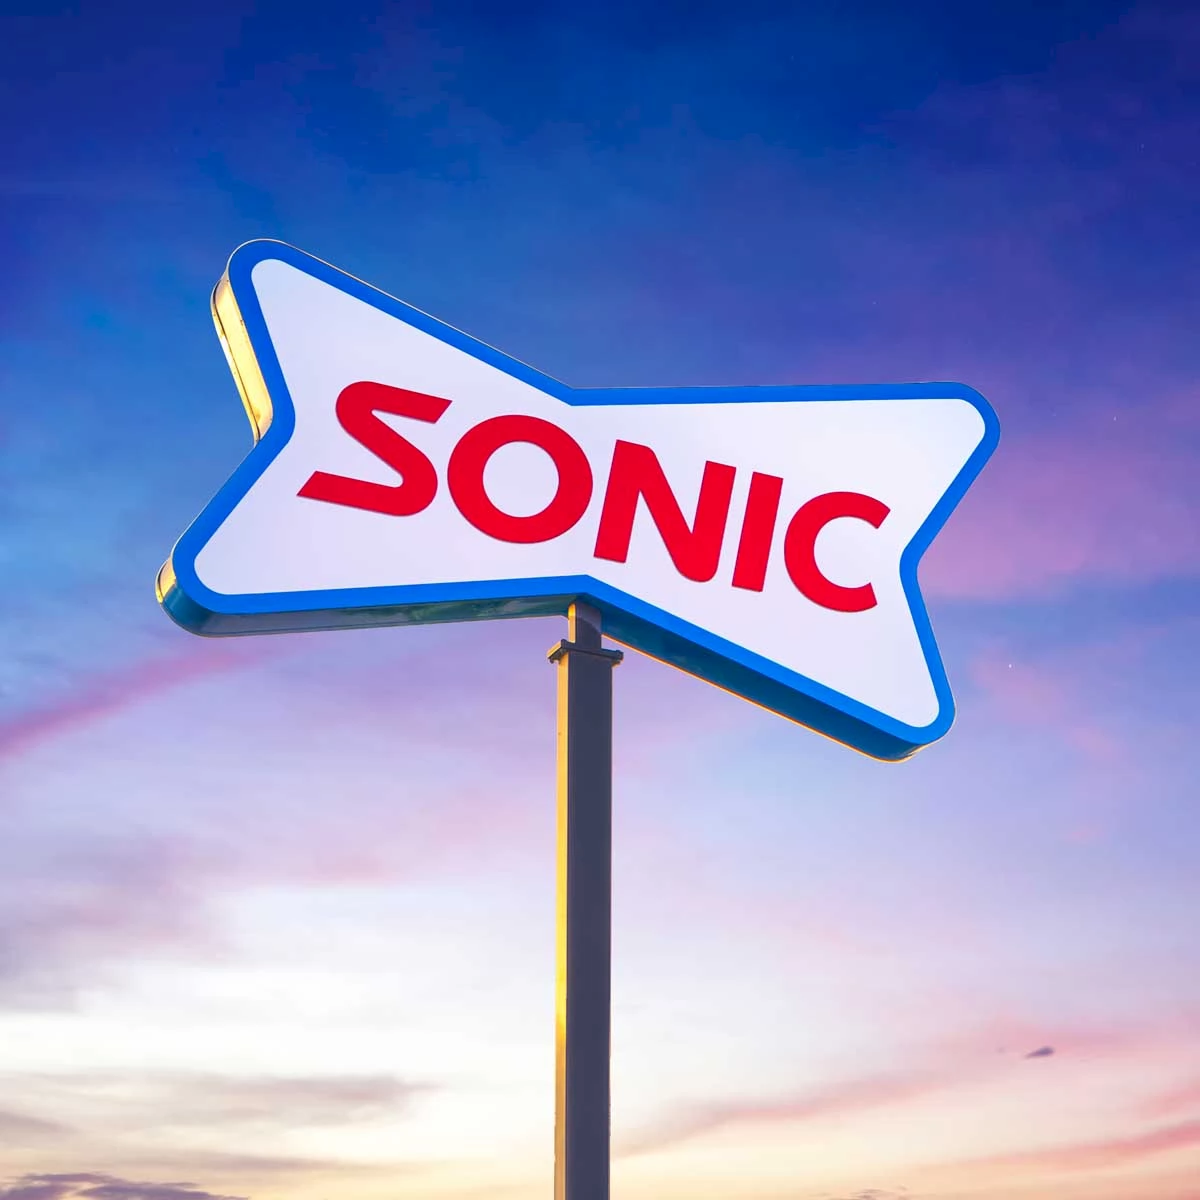 Sonic Restaurant's new Delight Prototype photographed by Mark A Steele Photography Inc